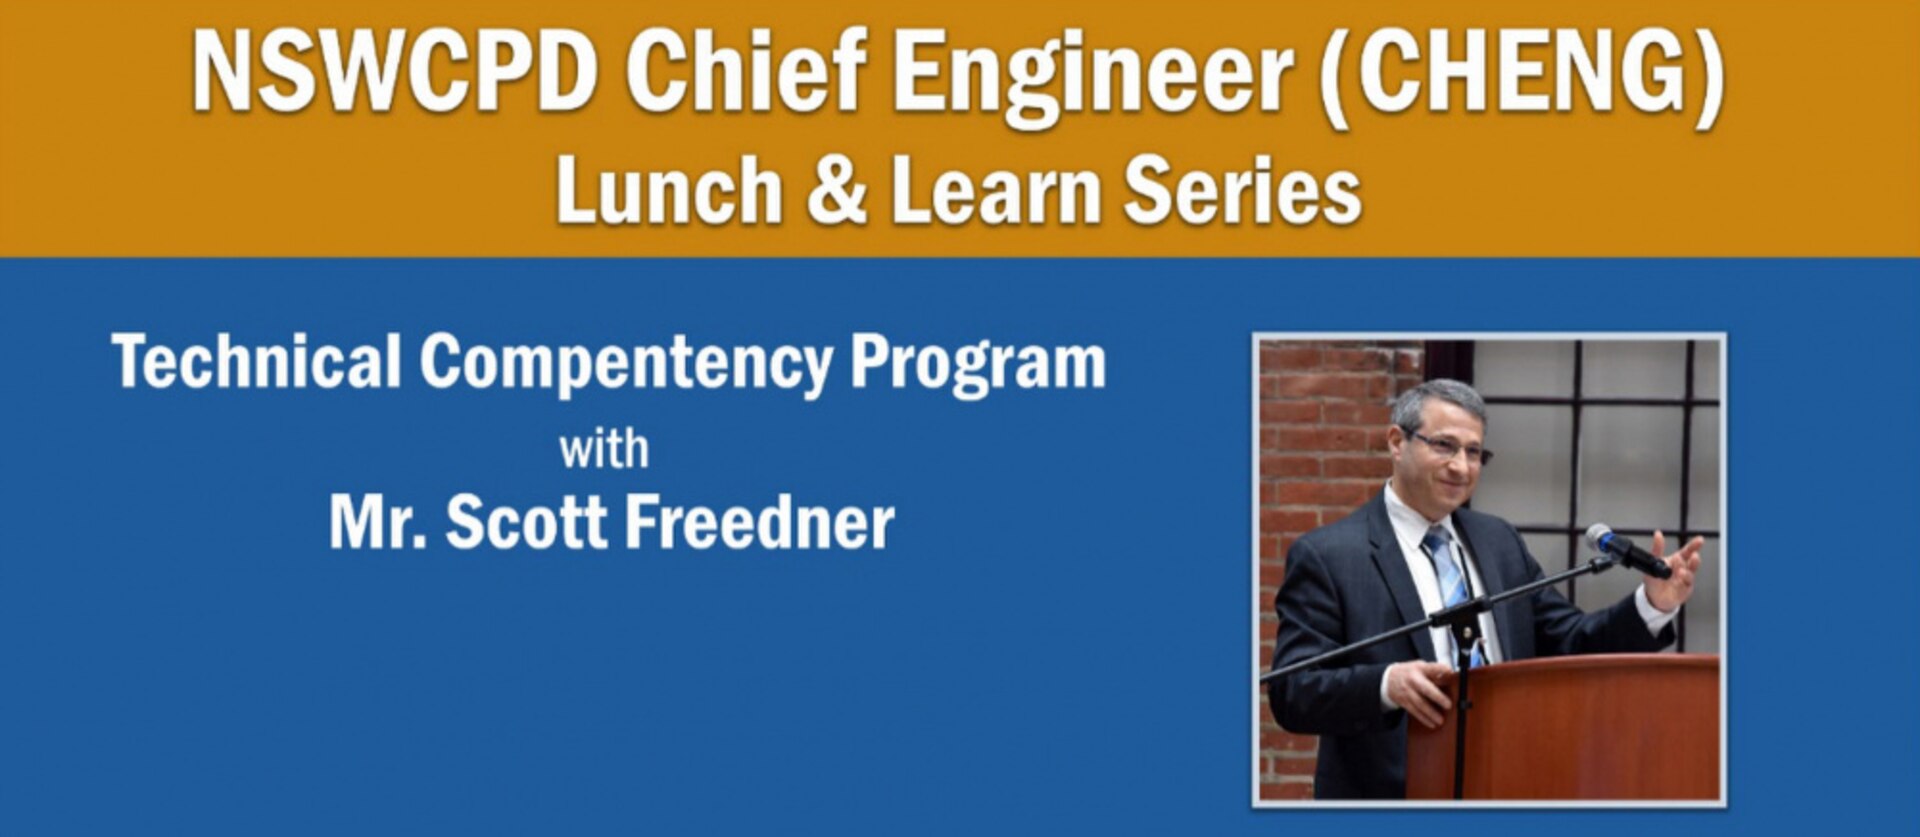 As part of a Lunch and Learn Series, Naval Surface Warfare Center, Philadelphia Division (NSWCPD) Chief Engineer (CHENG) Adam (Scott) Freedner hosted two virtual sessions on NSWCPD’s Technical Competency Development Program. The sessions were designed to explain NSWCPD’s Technical Competency Development Program and the importance of the program to maintaining world class expertise. (Graphic Courtesy NSWCPD/Released)